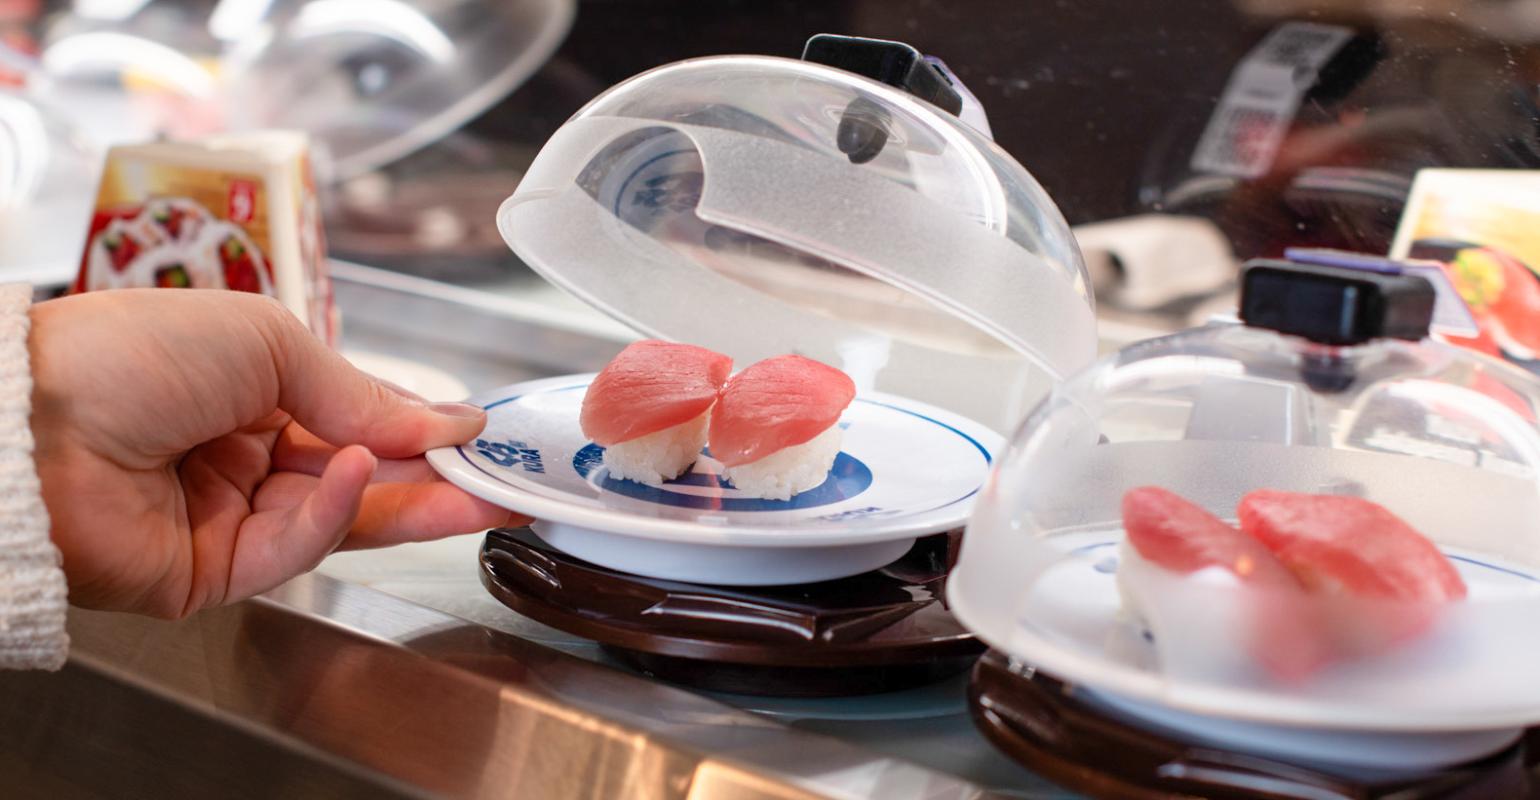 Sushi Maker Machine: The Different Types and Benefits